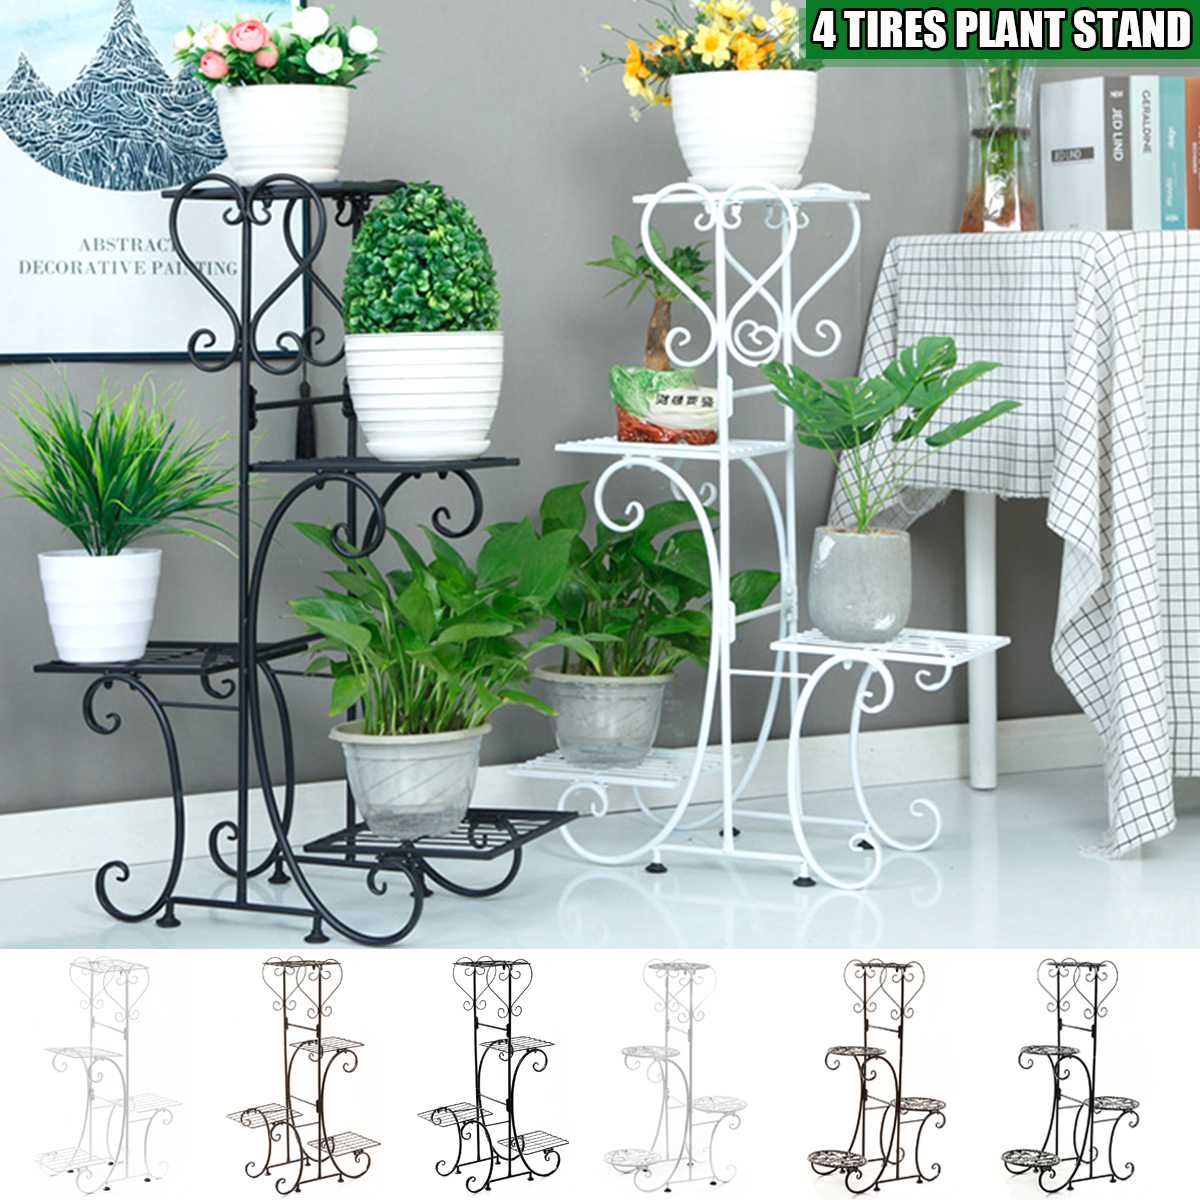 4 Tier Metal Plant Stand Holder Flower Pot Holder Shelves Display Rack Home  Decor Garden Balcony Flower Storage Rack – Plant Shelves – Aliexpress Pertaining To Four Tier Metal Plant Stands (View 11 of 15)